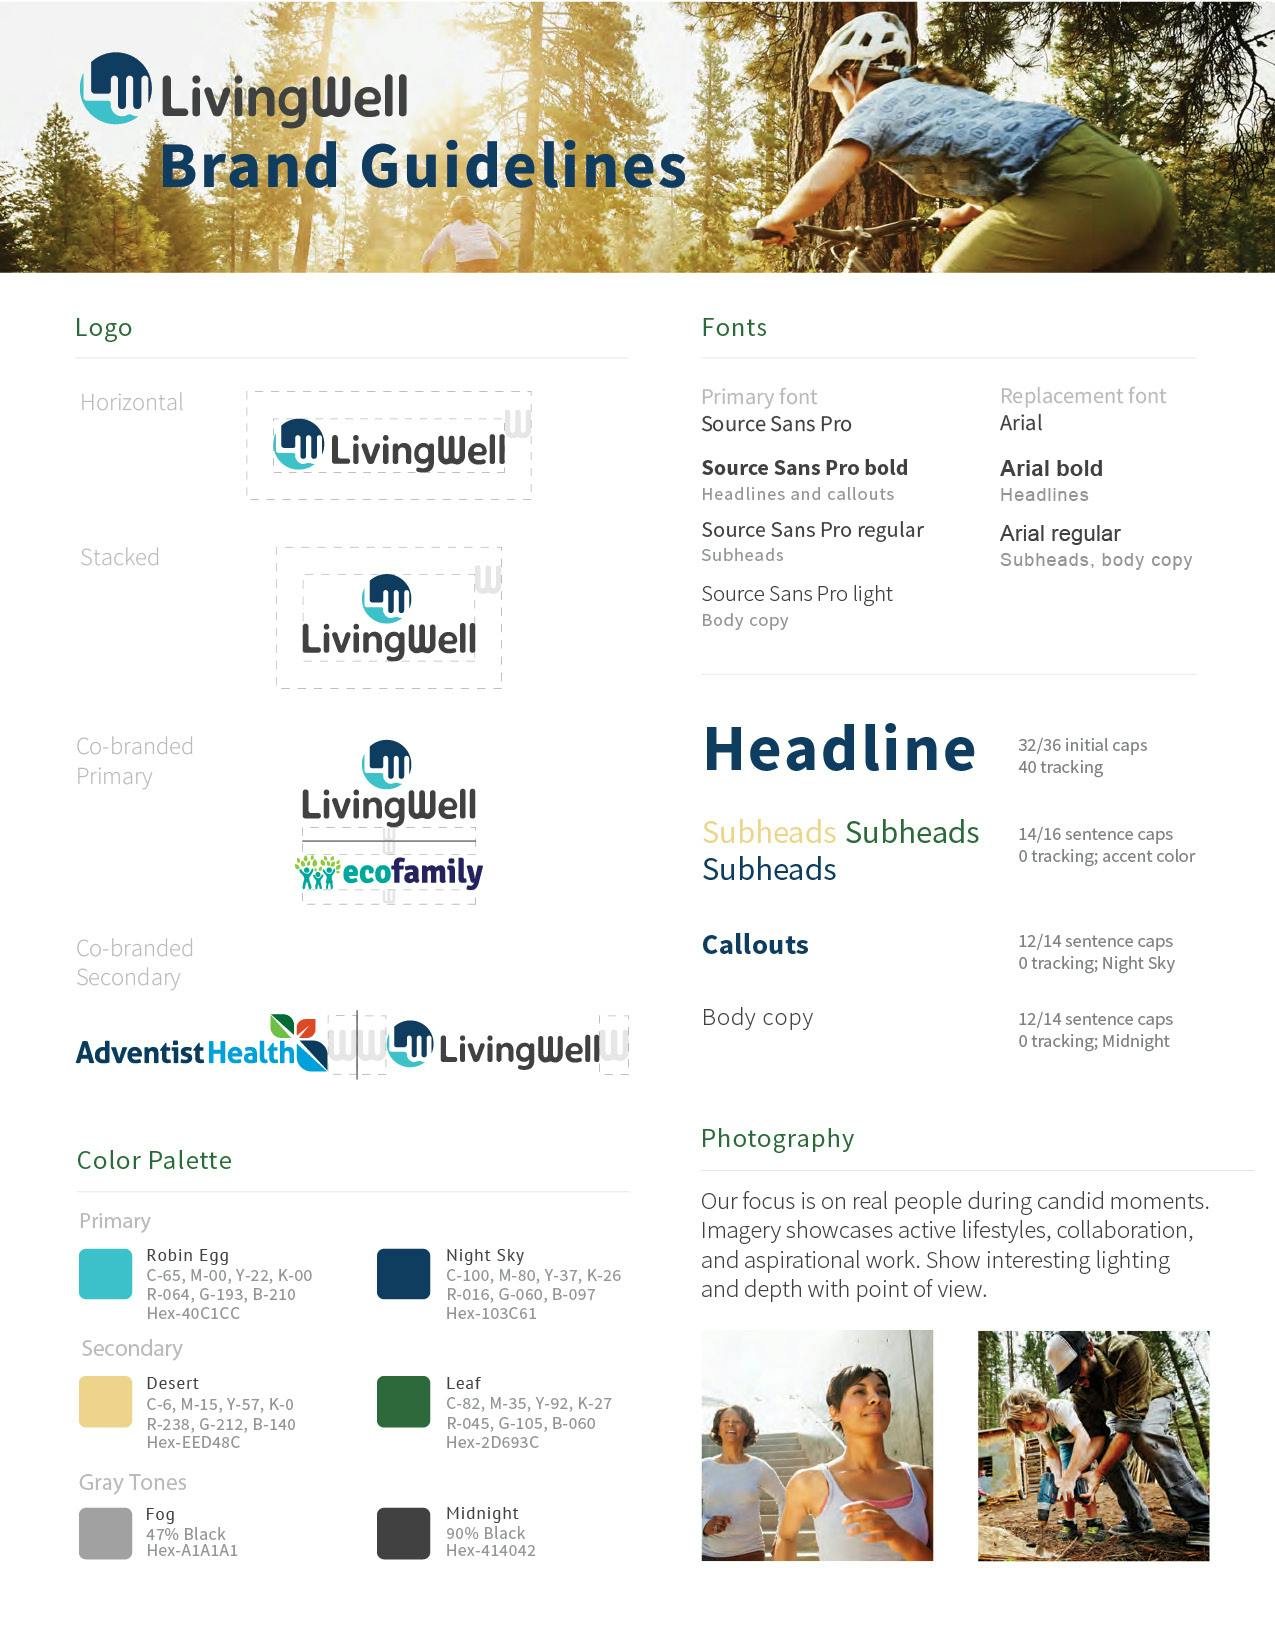 Image of Adventist Health Brand Guidelines